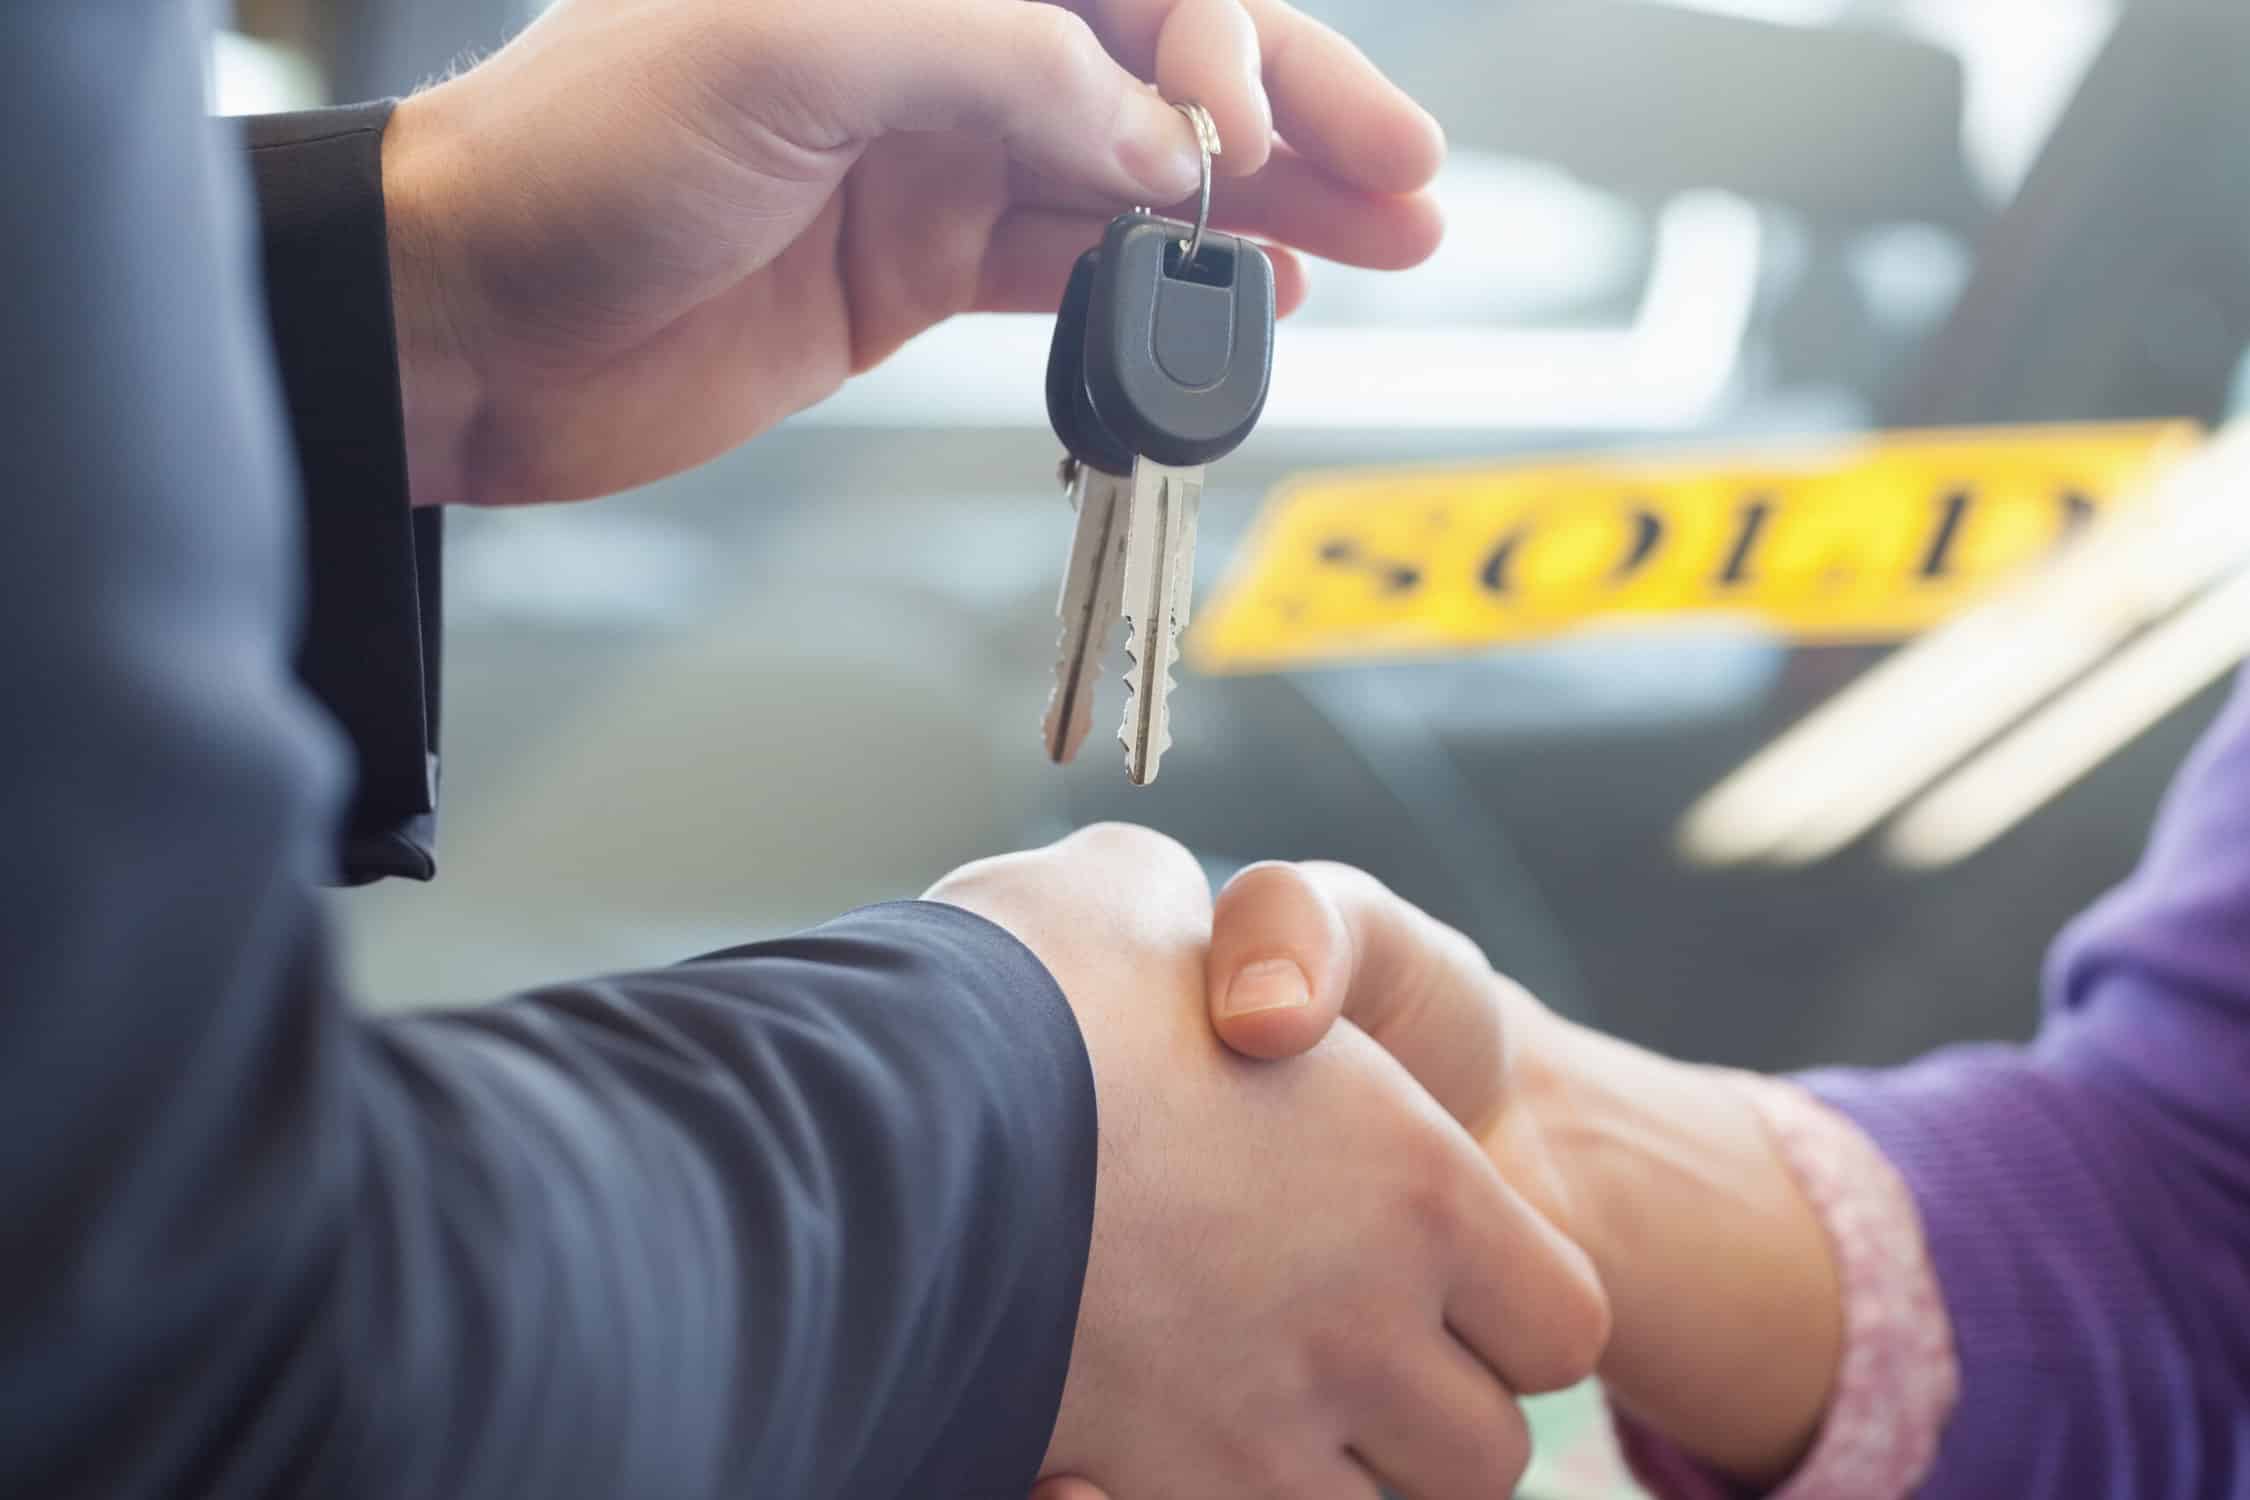 Person shaking hands in front of a sold car